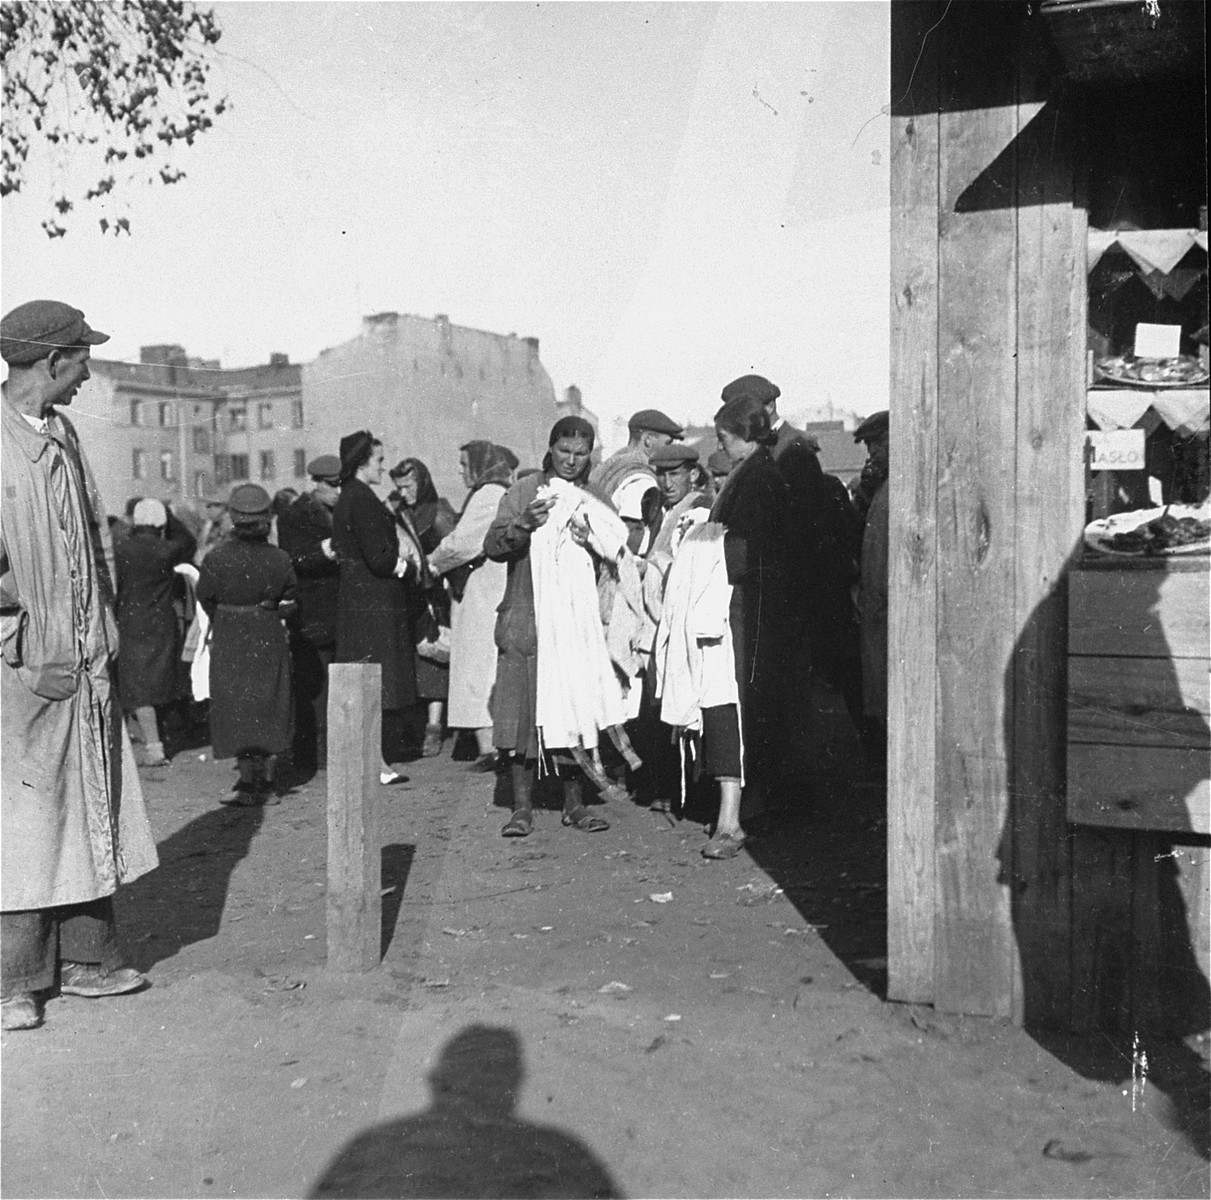 Inhabitants of the Warsaw ghetto sell clothing to Polish customers at an open air market.  

Joest's original caption reads: "Those with the white armbands, the Jews, were the ones selling.  Those without armbands, the Poles, were the buyers."